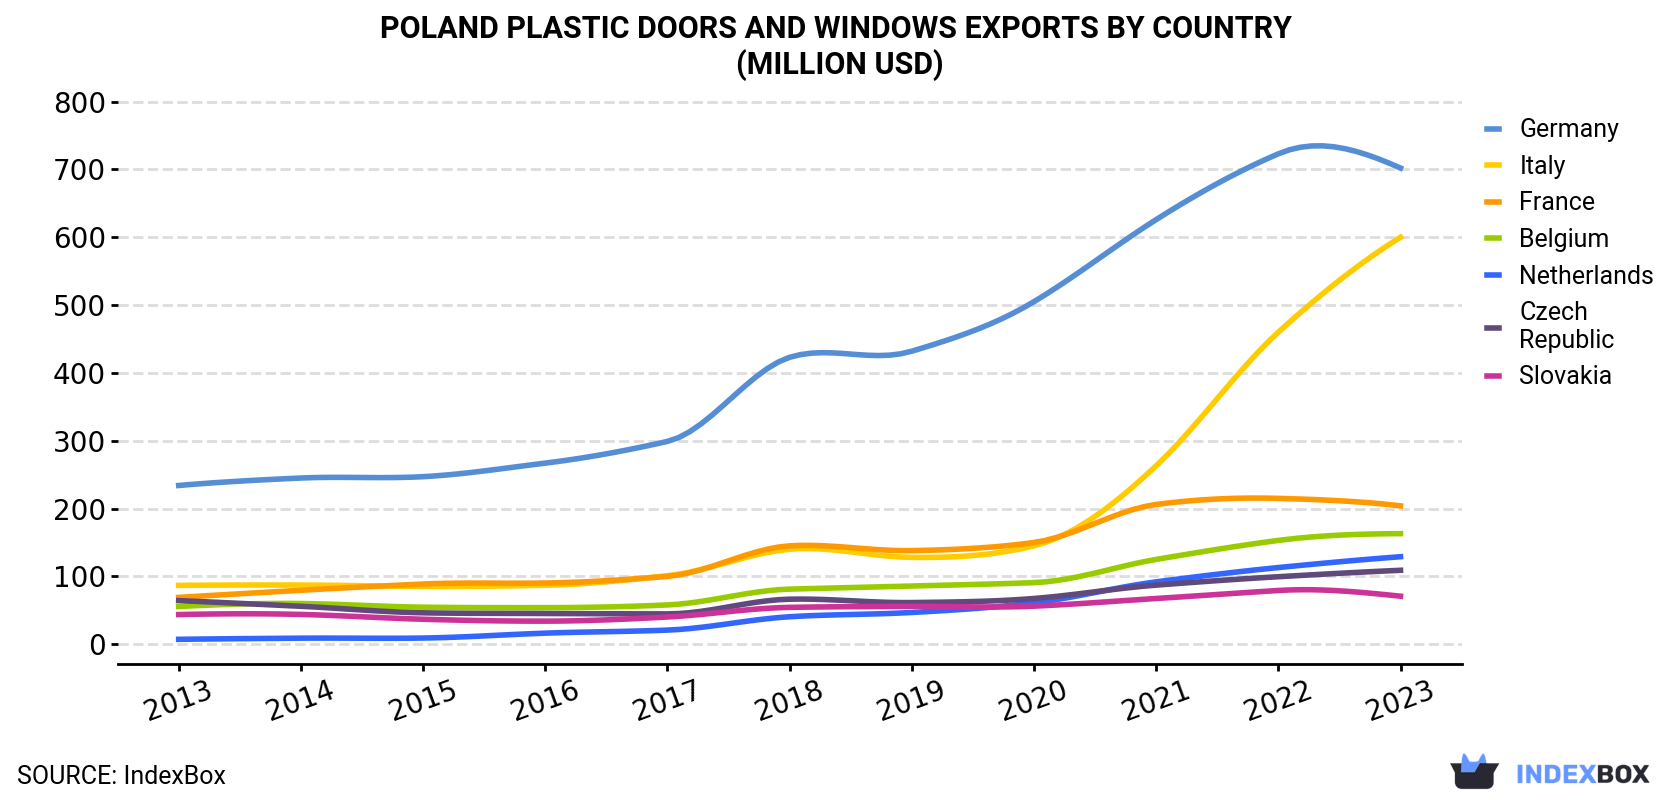 Poland Plastic Doors And Windows Exports By Country (Million USD)